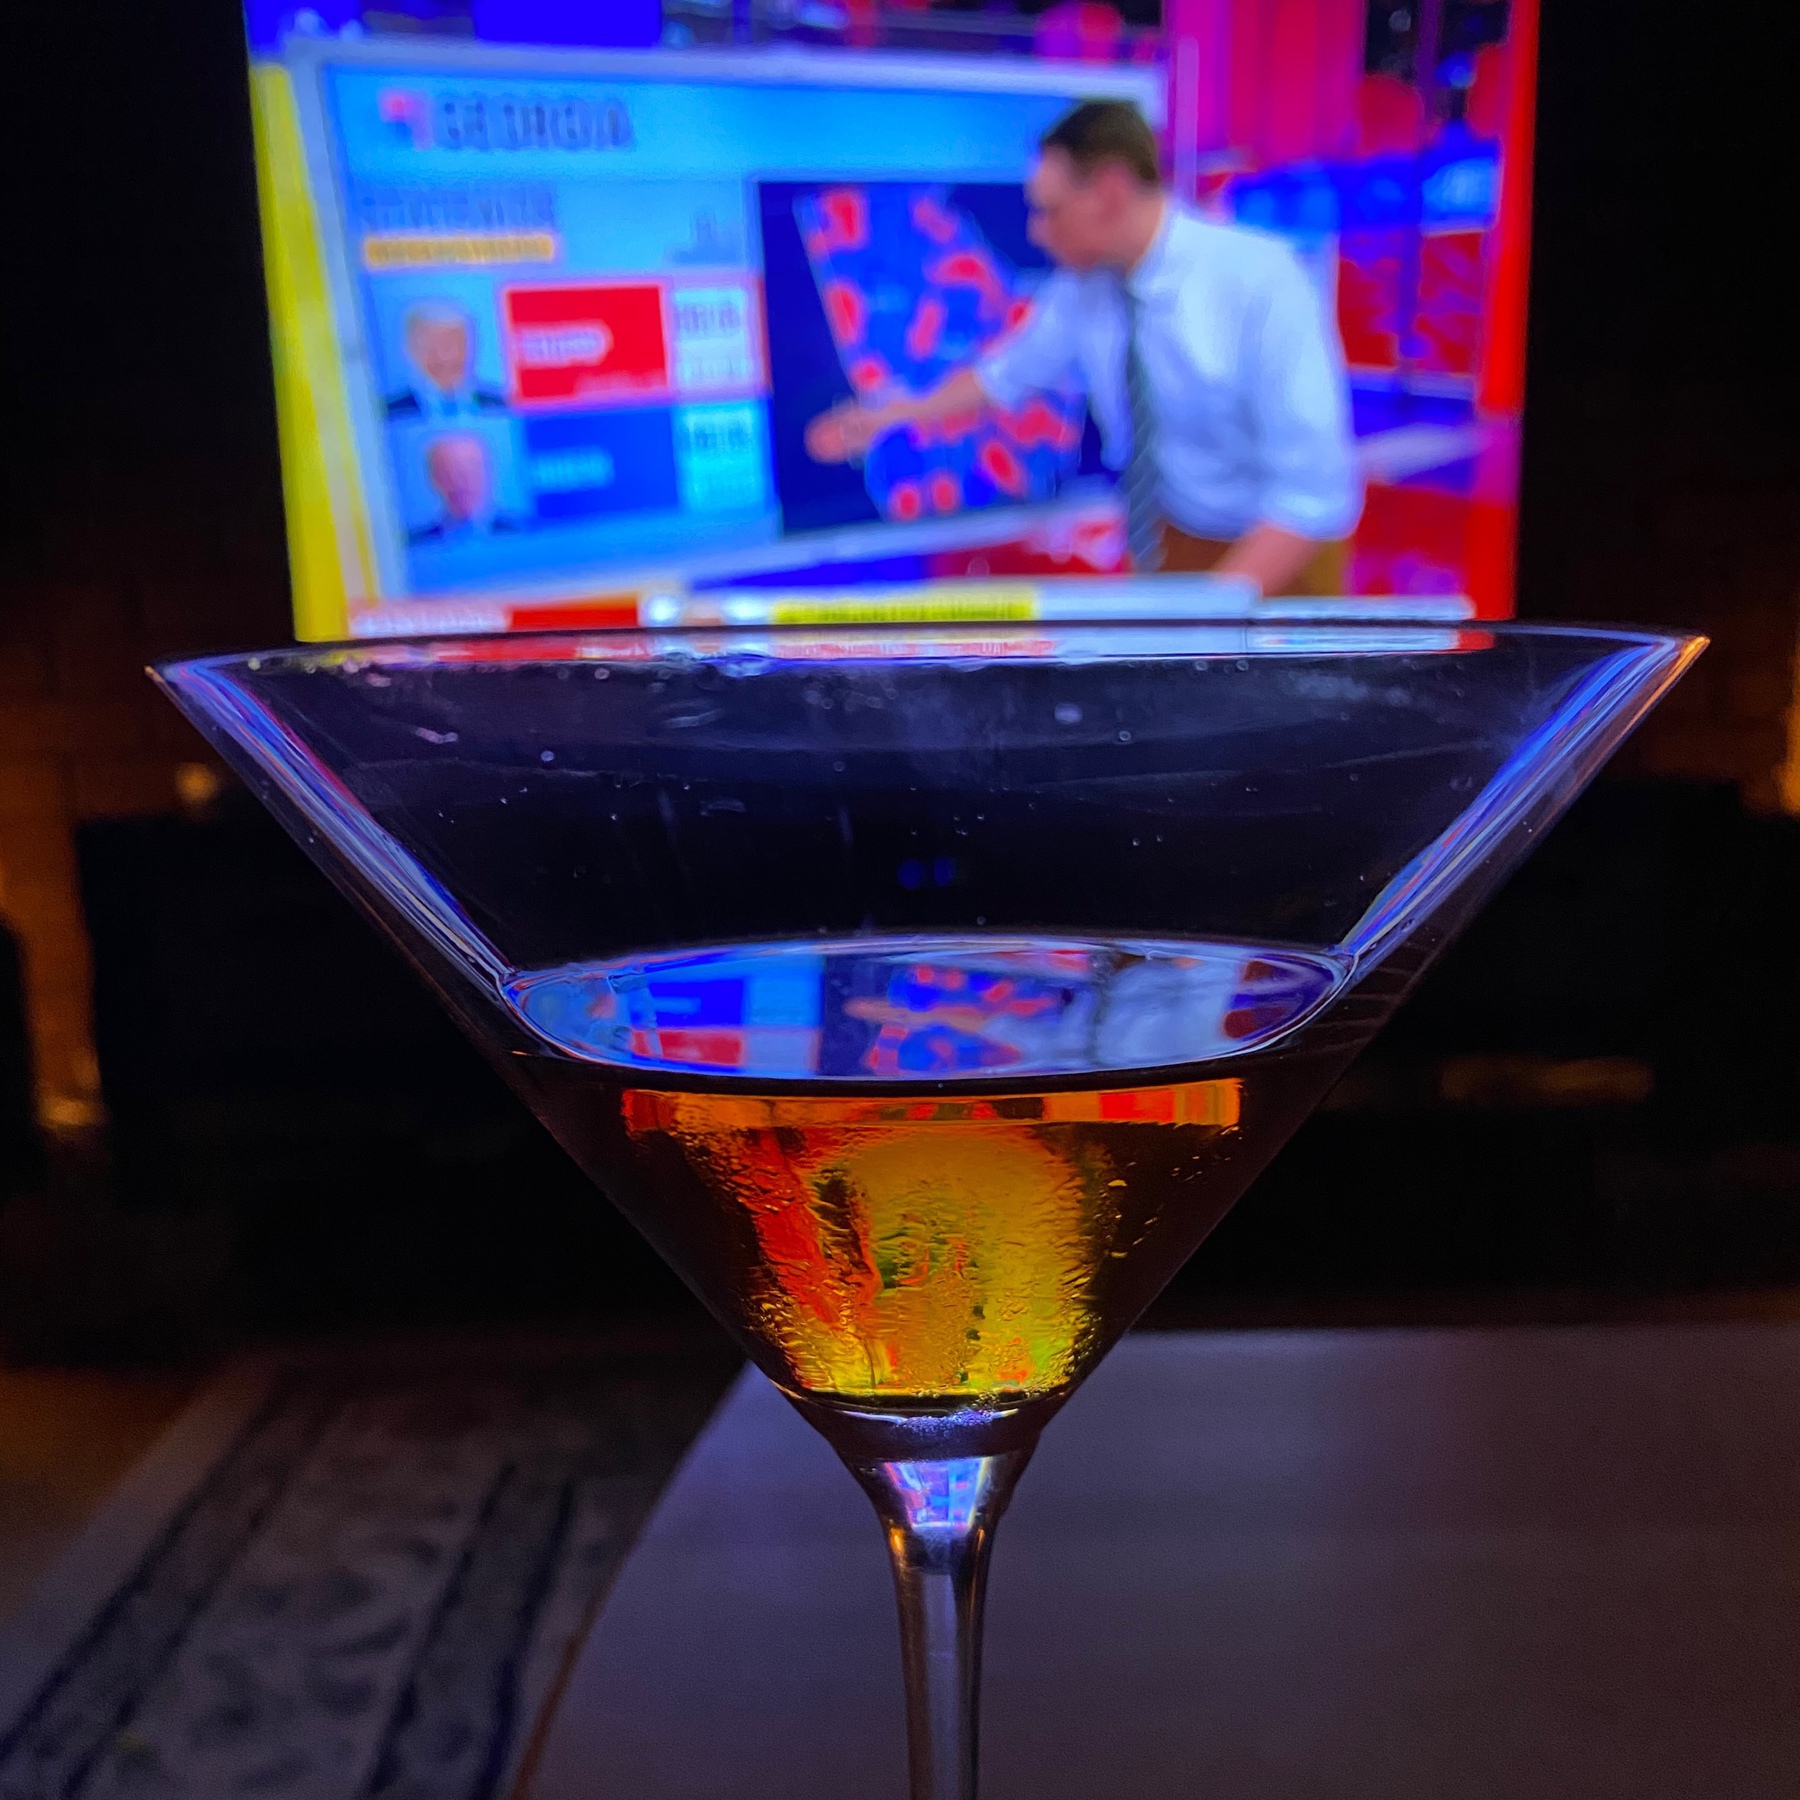 Martini glass with television in background.